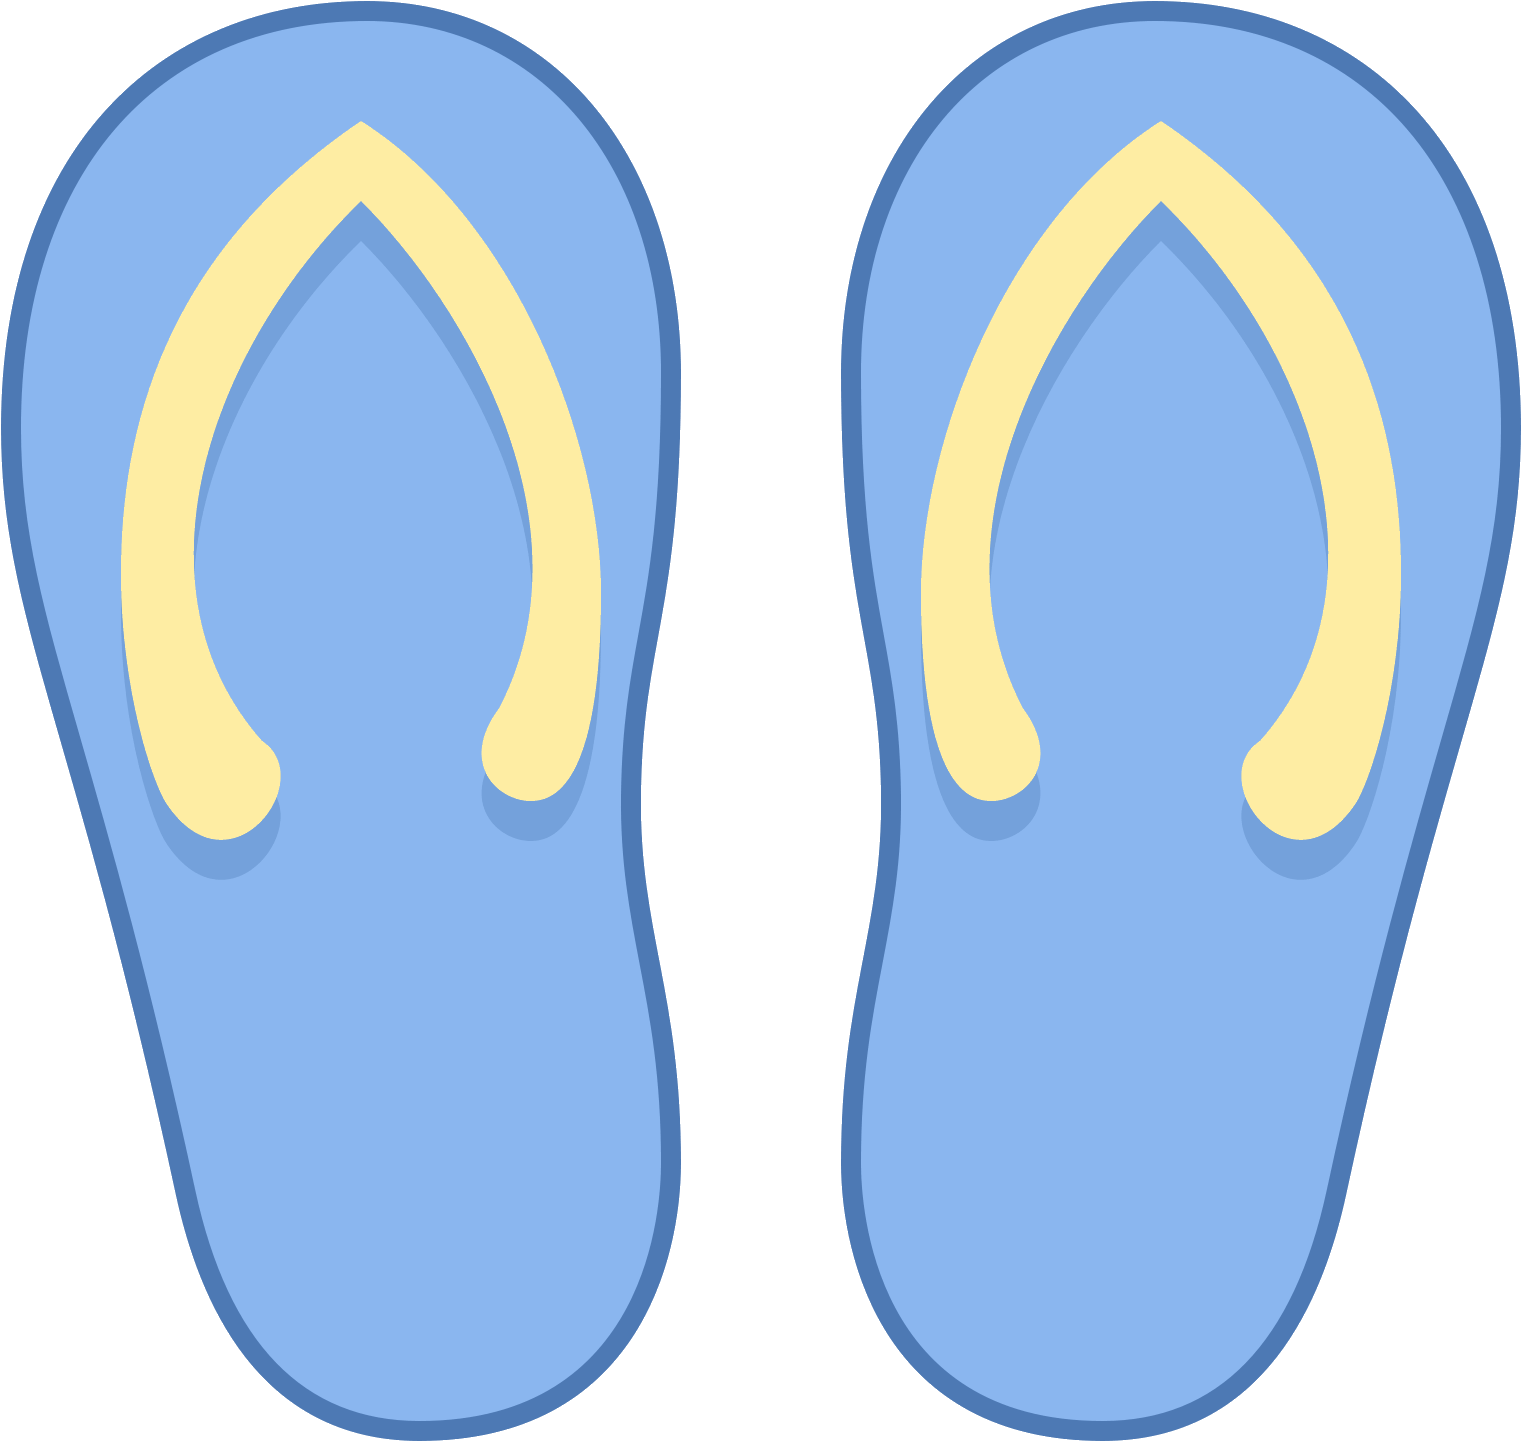 The Icon Resembles Two Upside Down Pear Shapes That - Flip Flop Icon S (1600x1600)